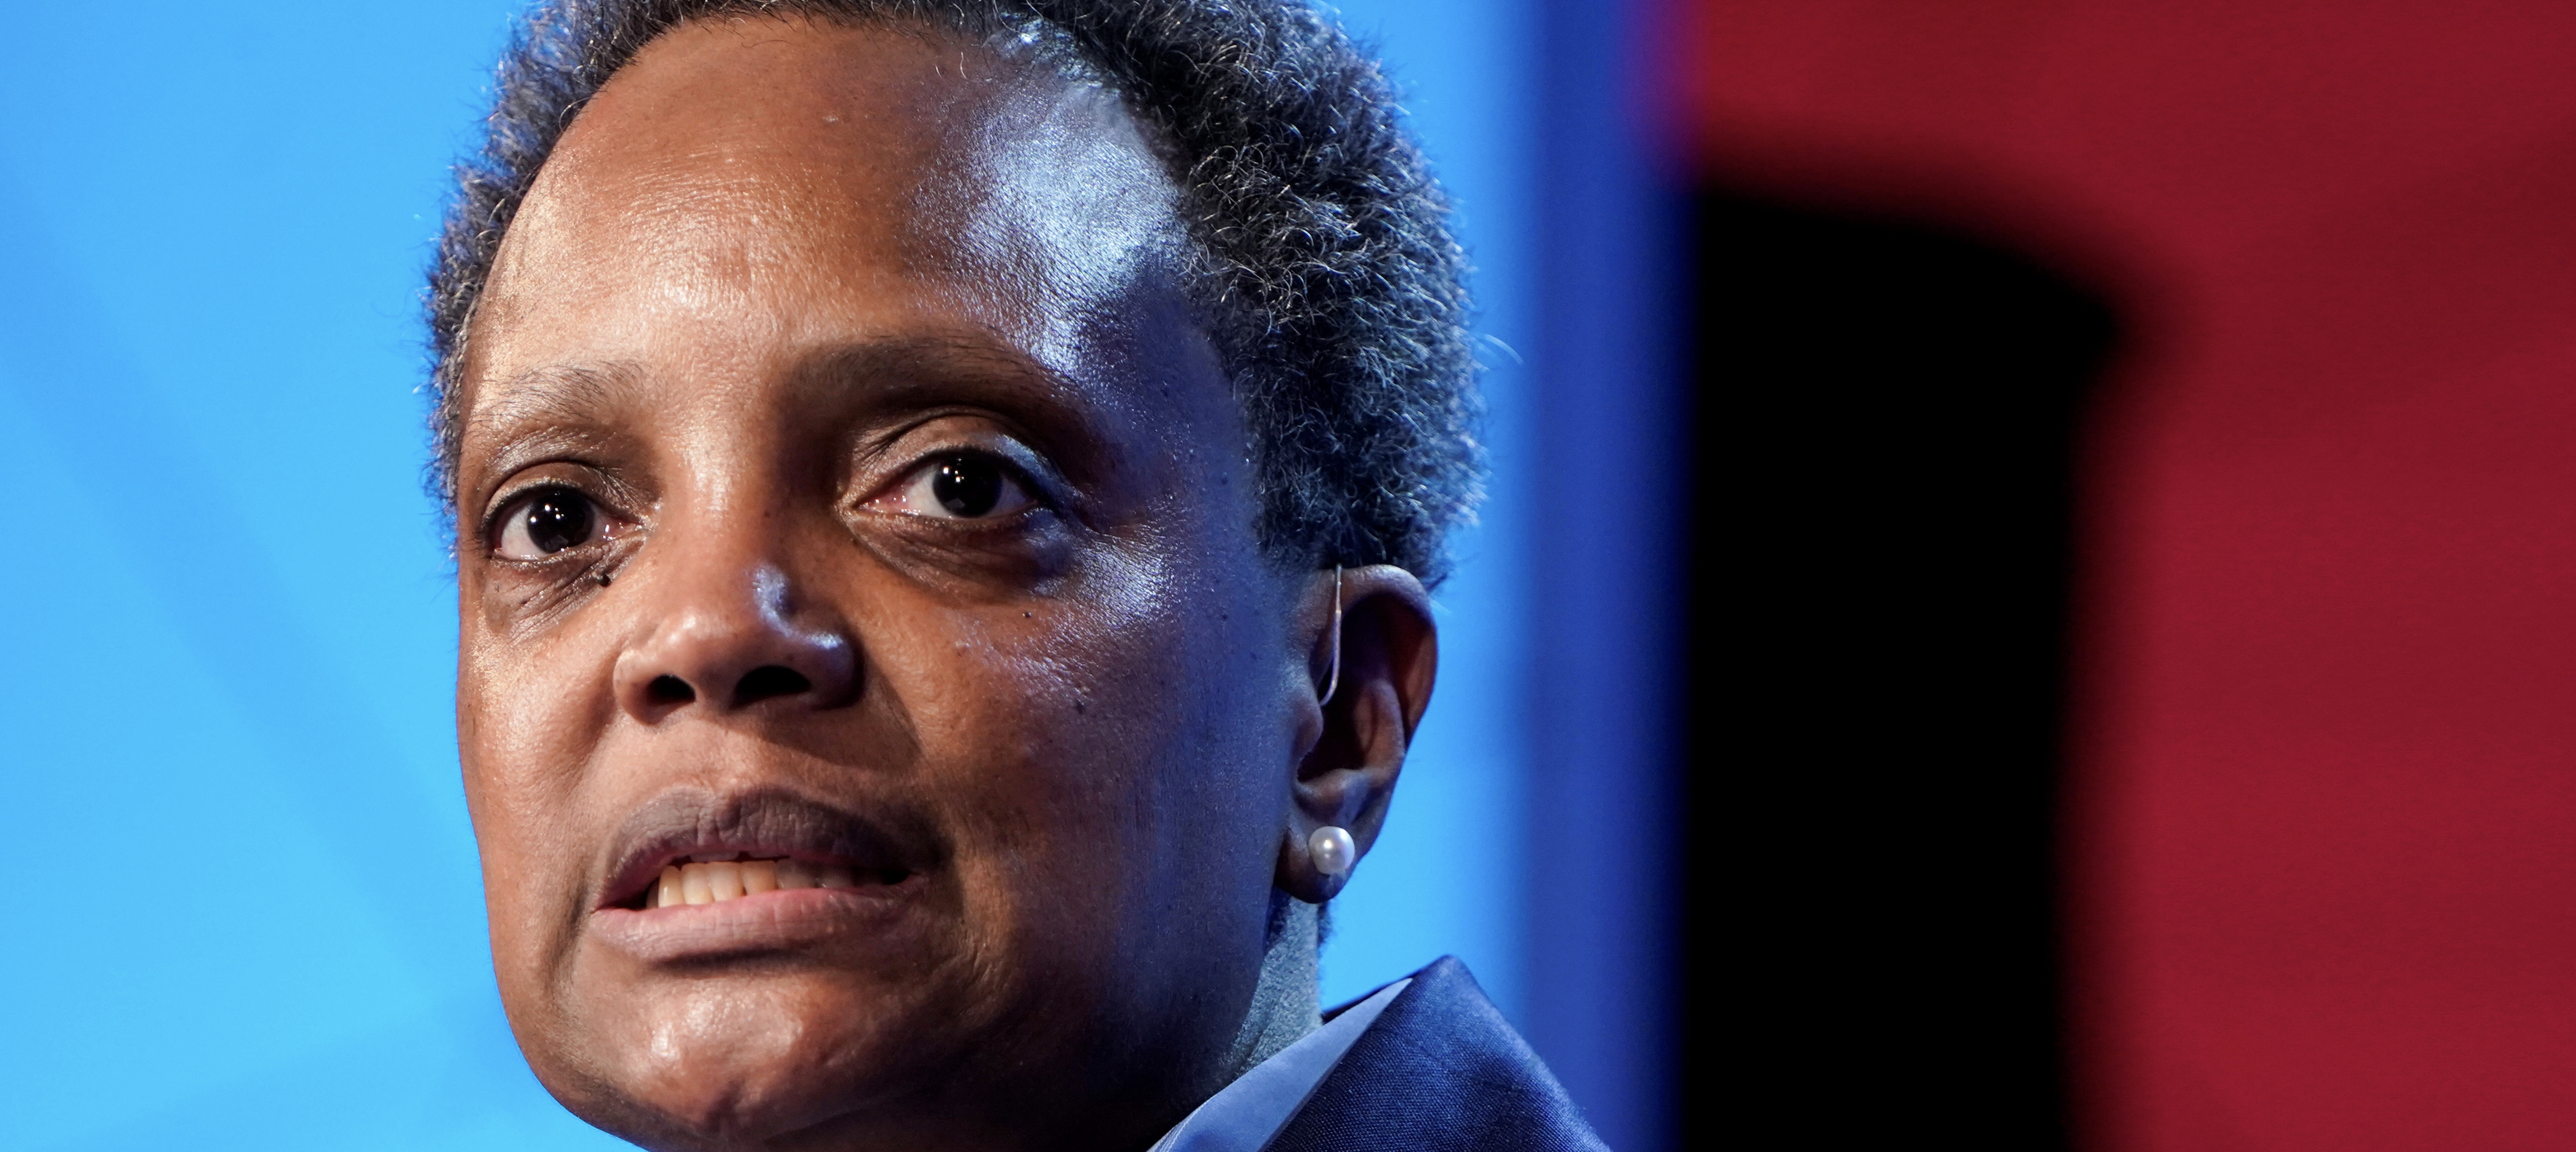 Mayor of Chicago Lori Lightfoot speaks at the U.S. Conference of Mayors 88th Winter Meeting in Washington, U.S., January 23, 2020. REUTERS/Joshua Roberts